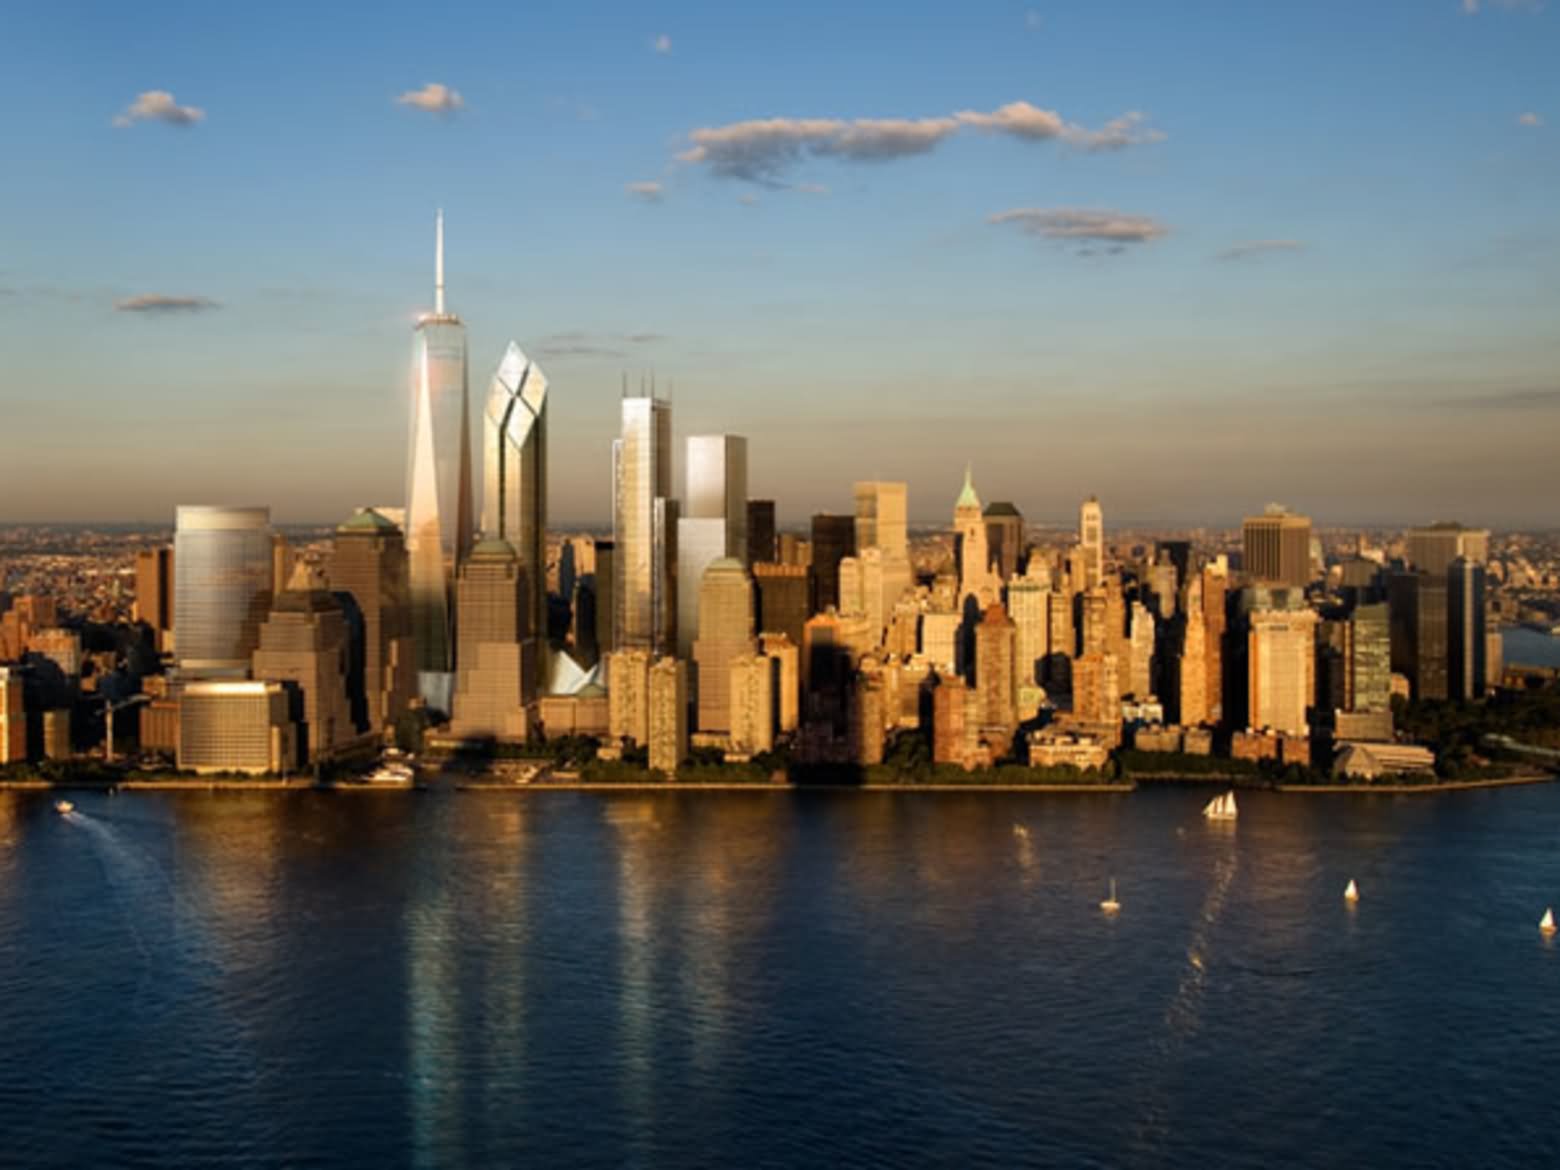 Sunset View Picture Of One World Trade Center And Manhattan City